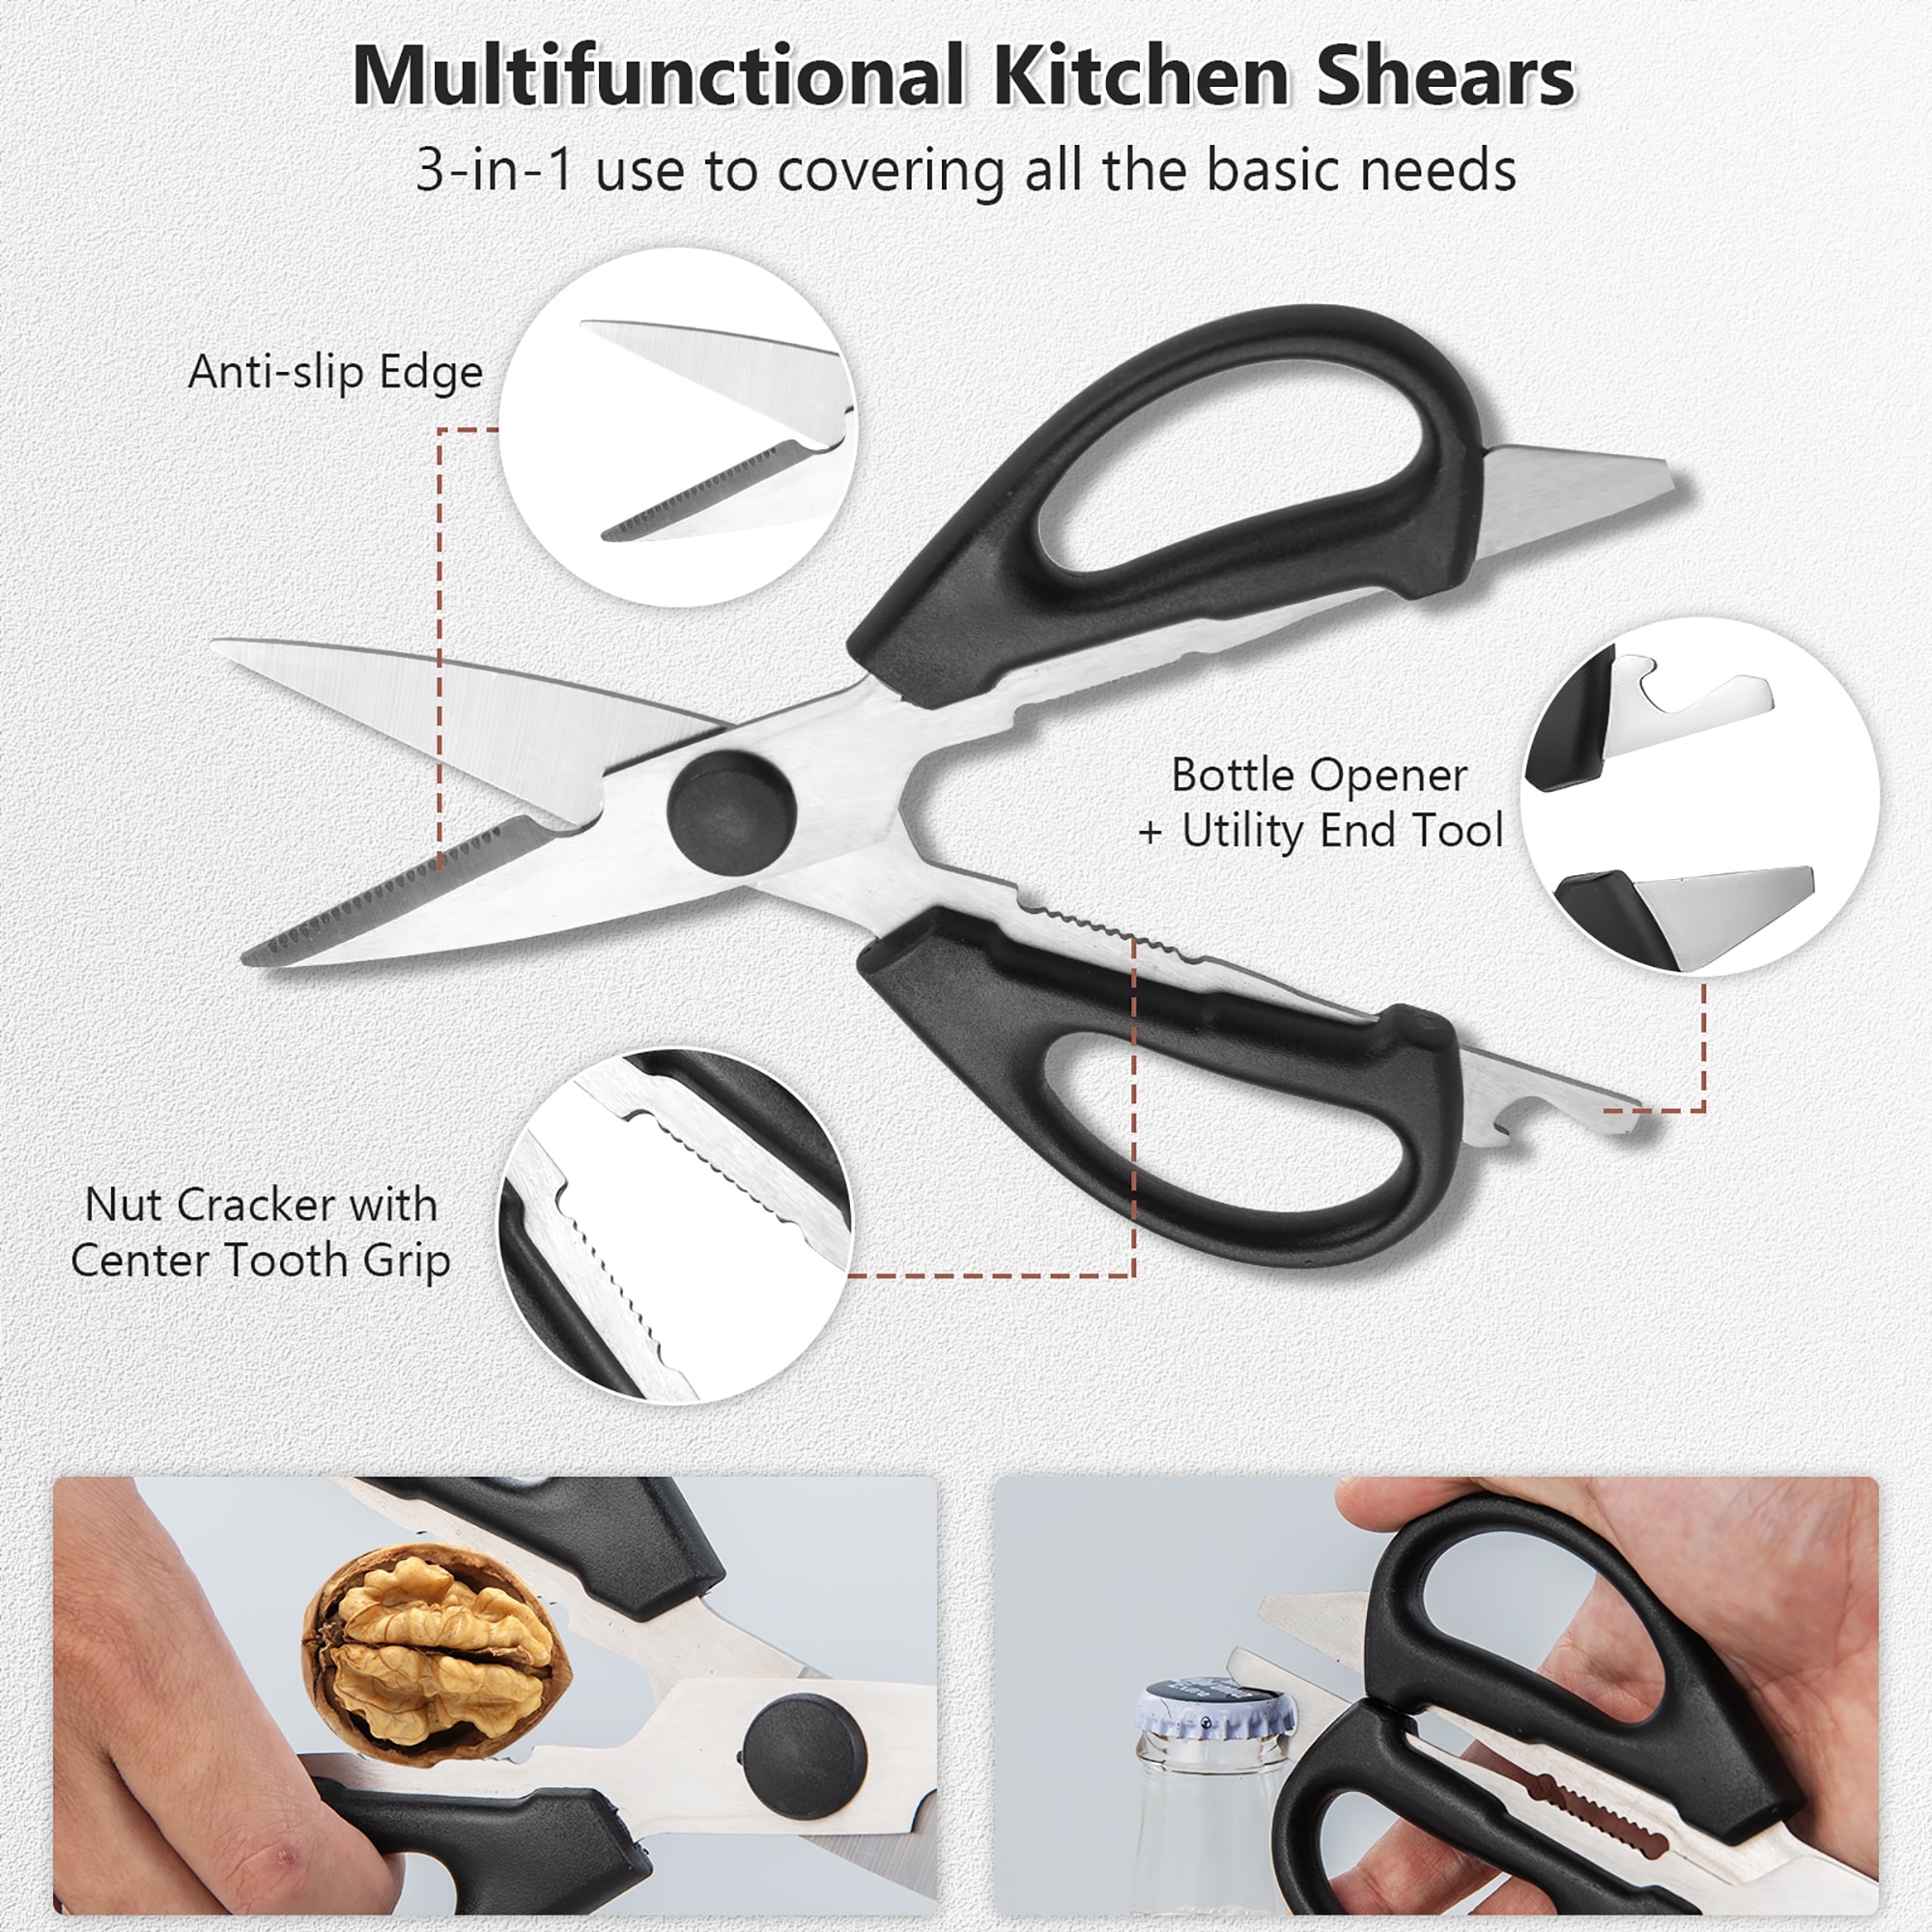 https://ak1.ostkcdn.com/images/products/is/images/direct/027cbc4cb976bcf8d85148328e09a1fe7746307b/Costway-Kitchen-Knife-Set-15pcs-Stainless-Steel-Knife-Block-Set-w-.jpg